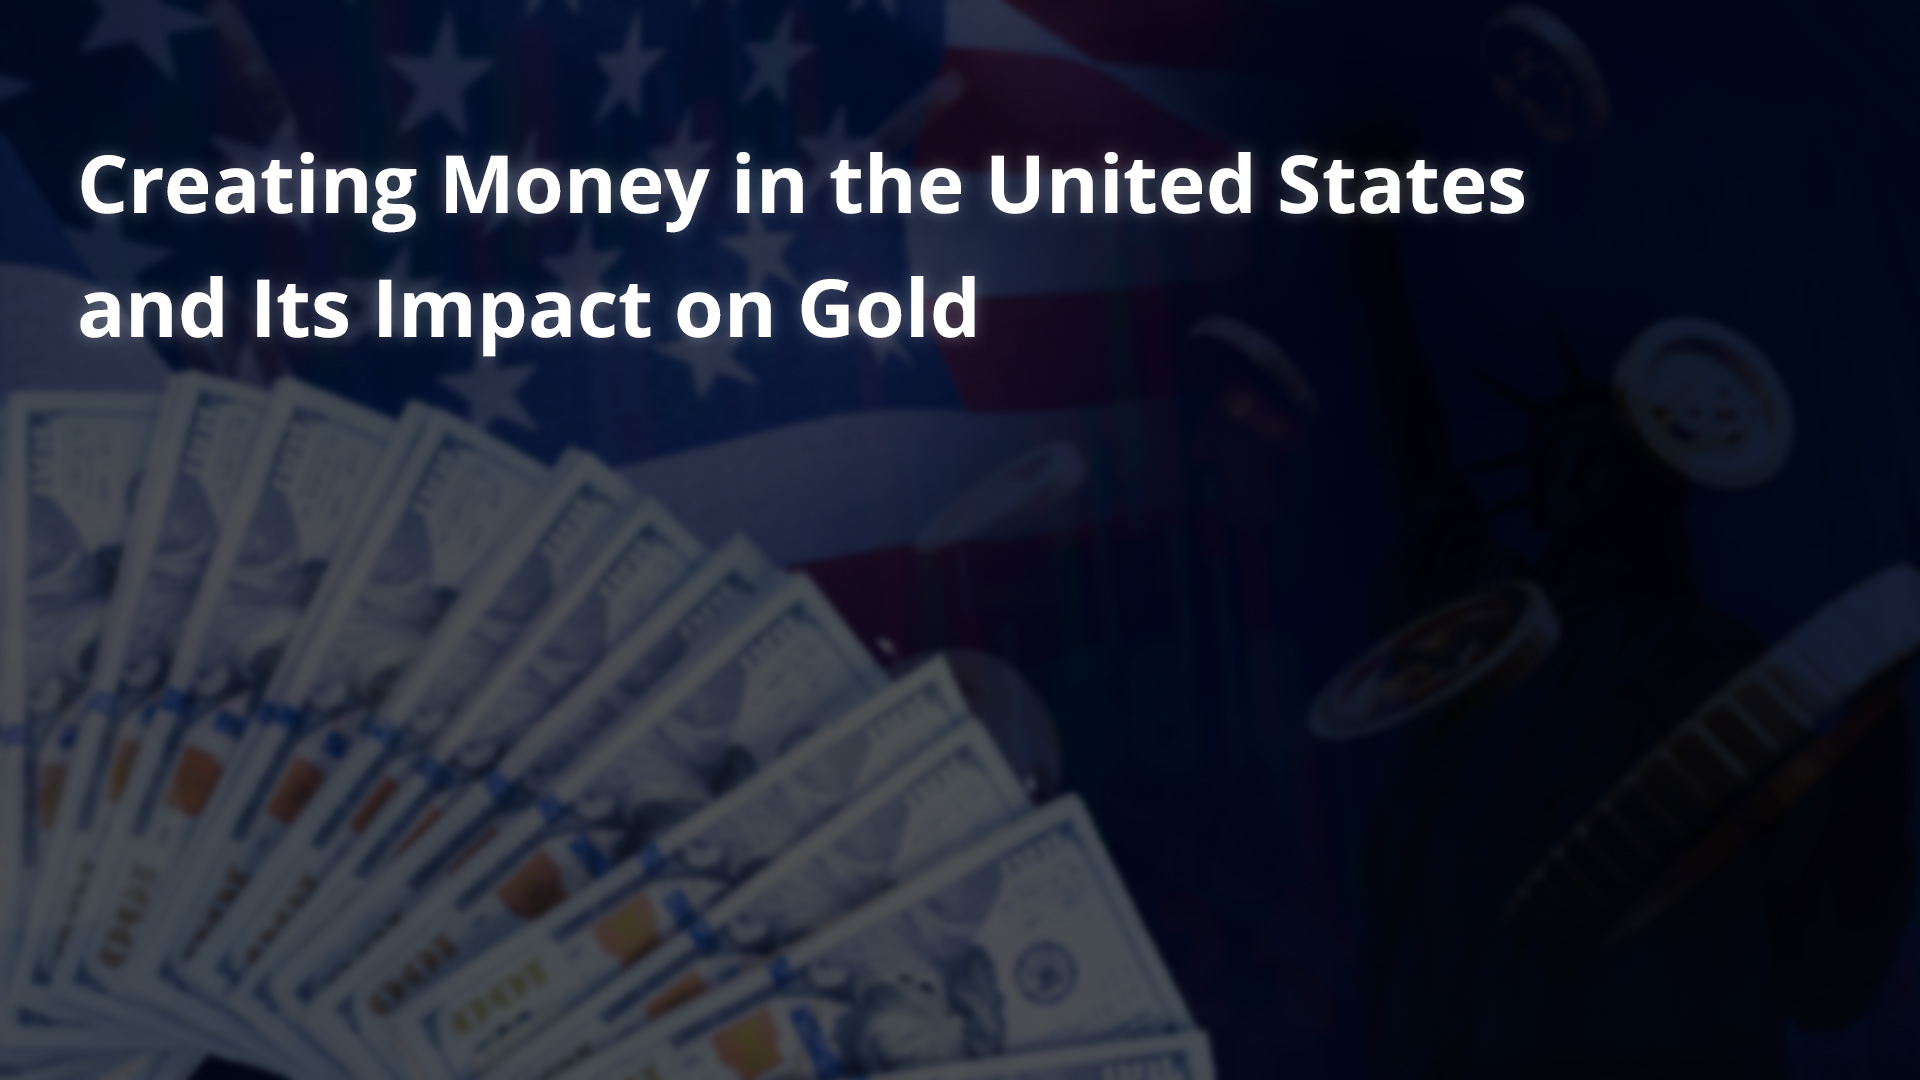 Creating Money in the United States and Its Impact on Gold